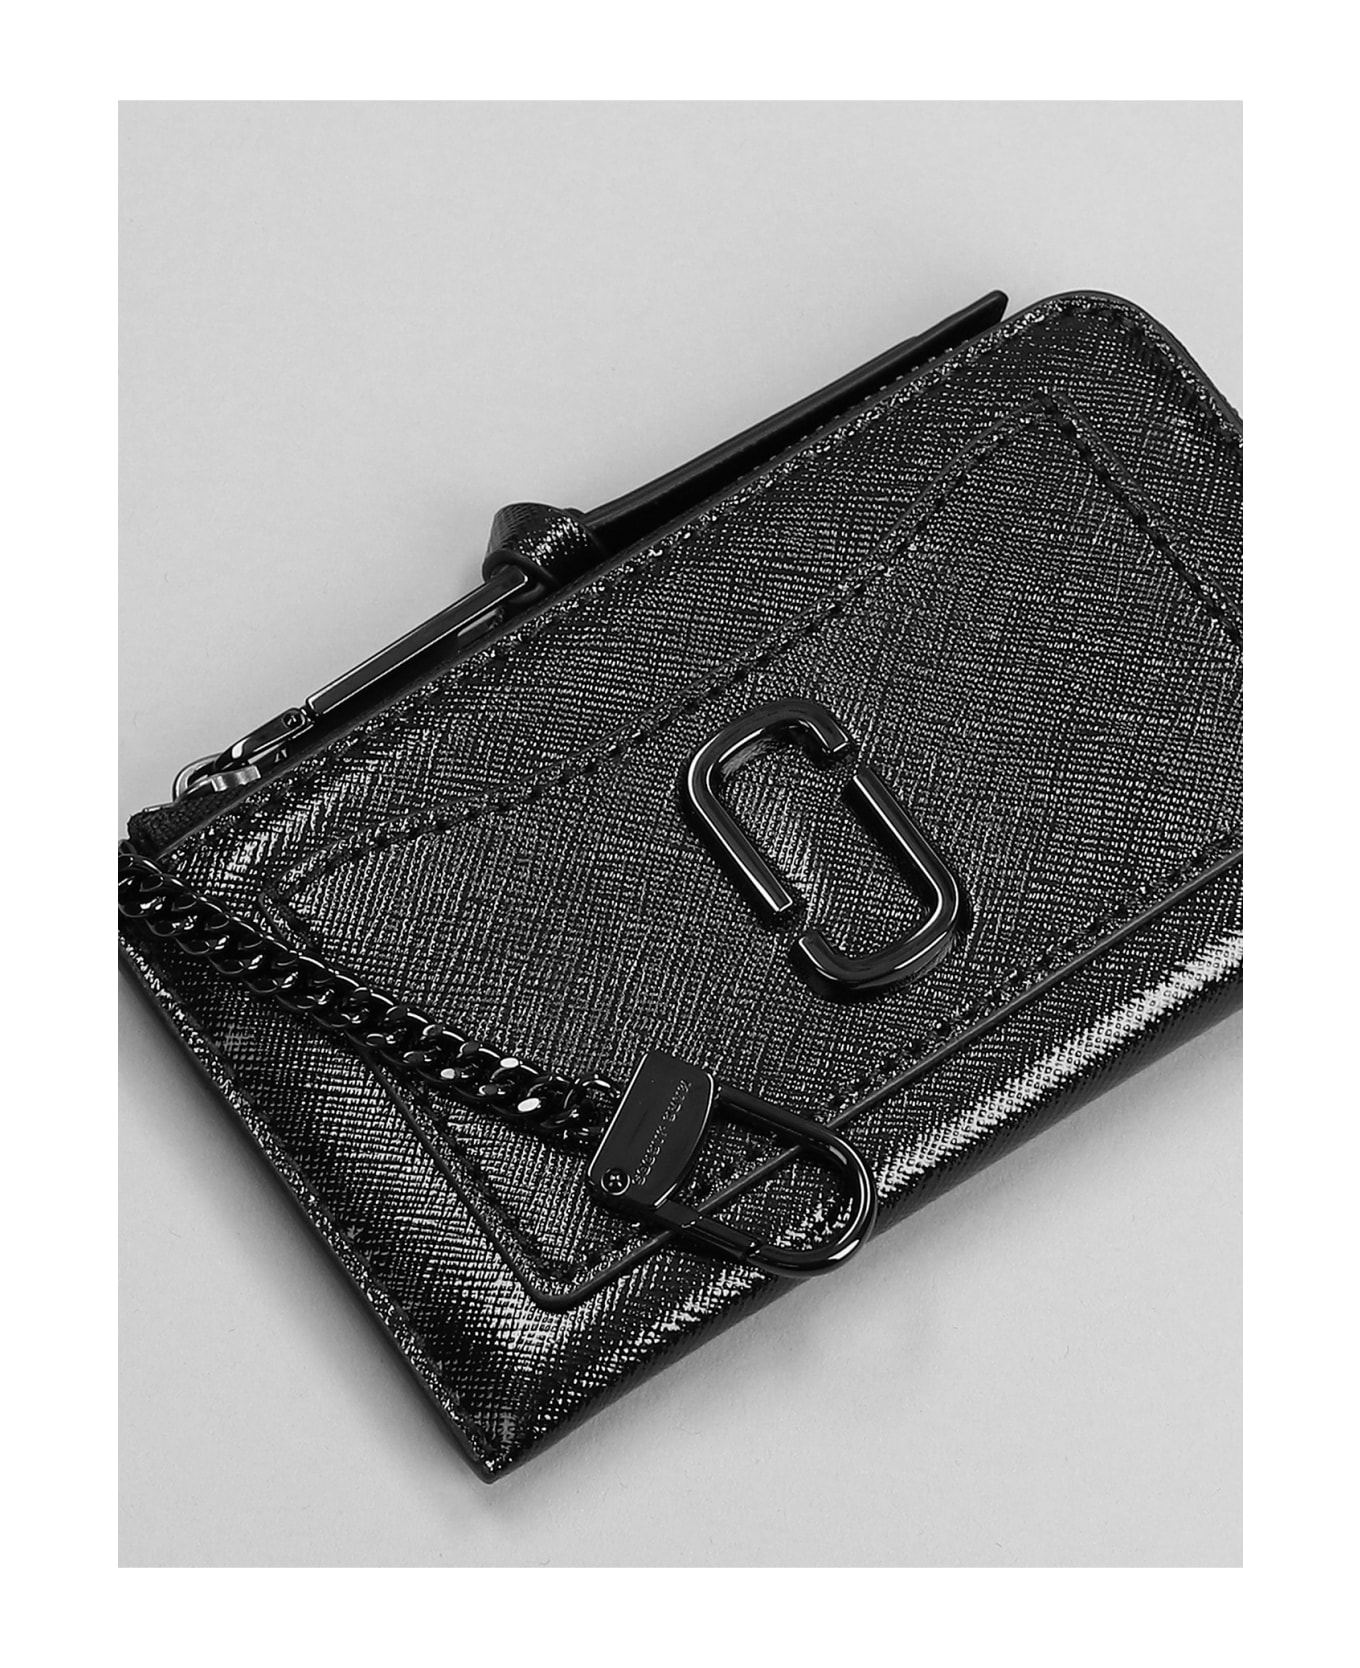 Marc Jacobs The Top Zip Multi Wallet In Black Leather - NERO 財布